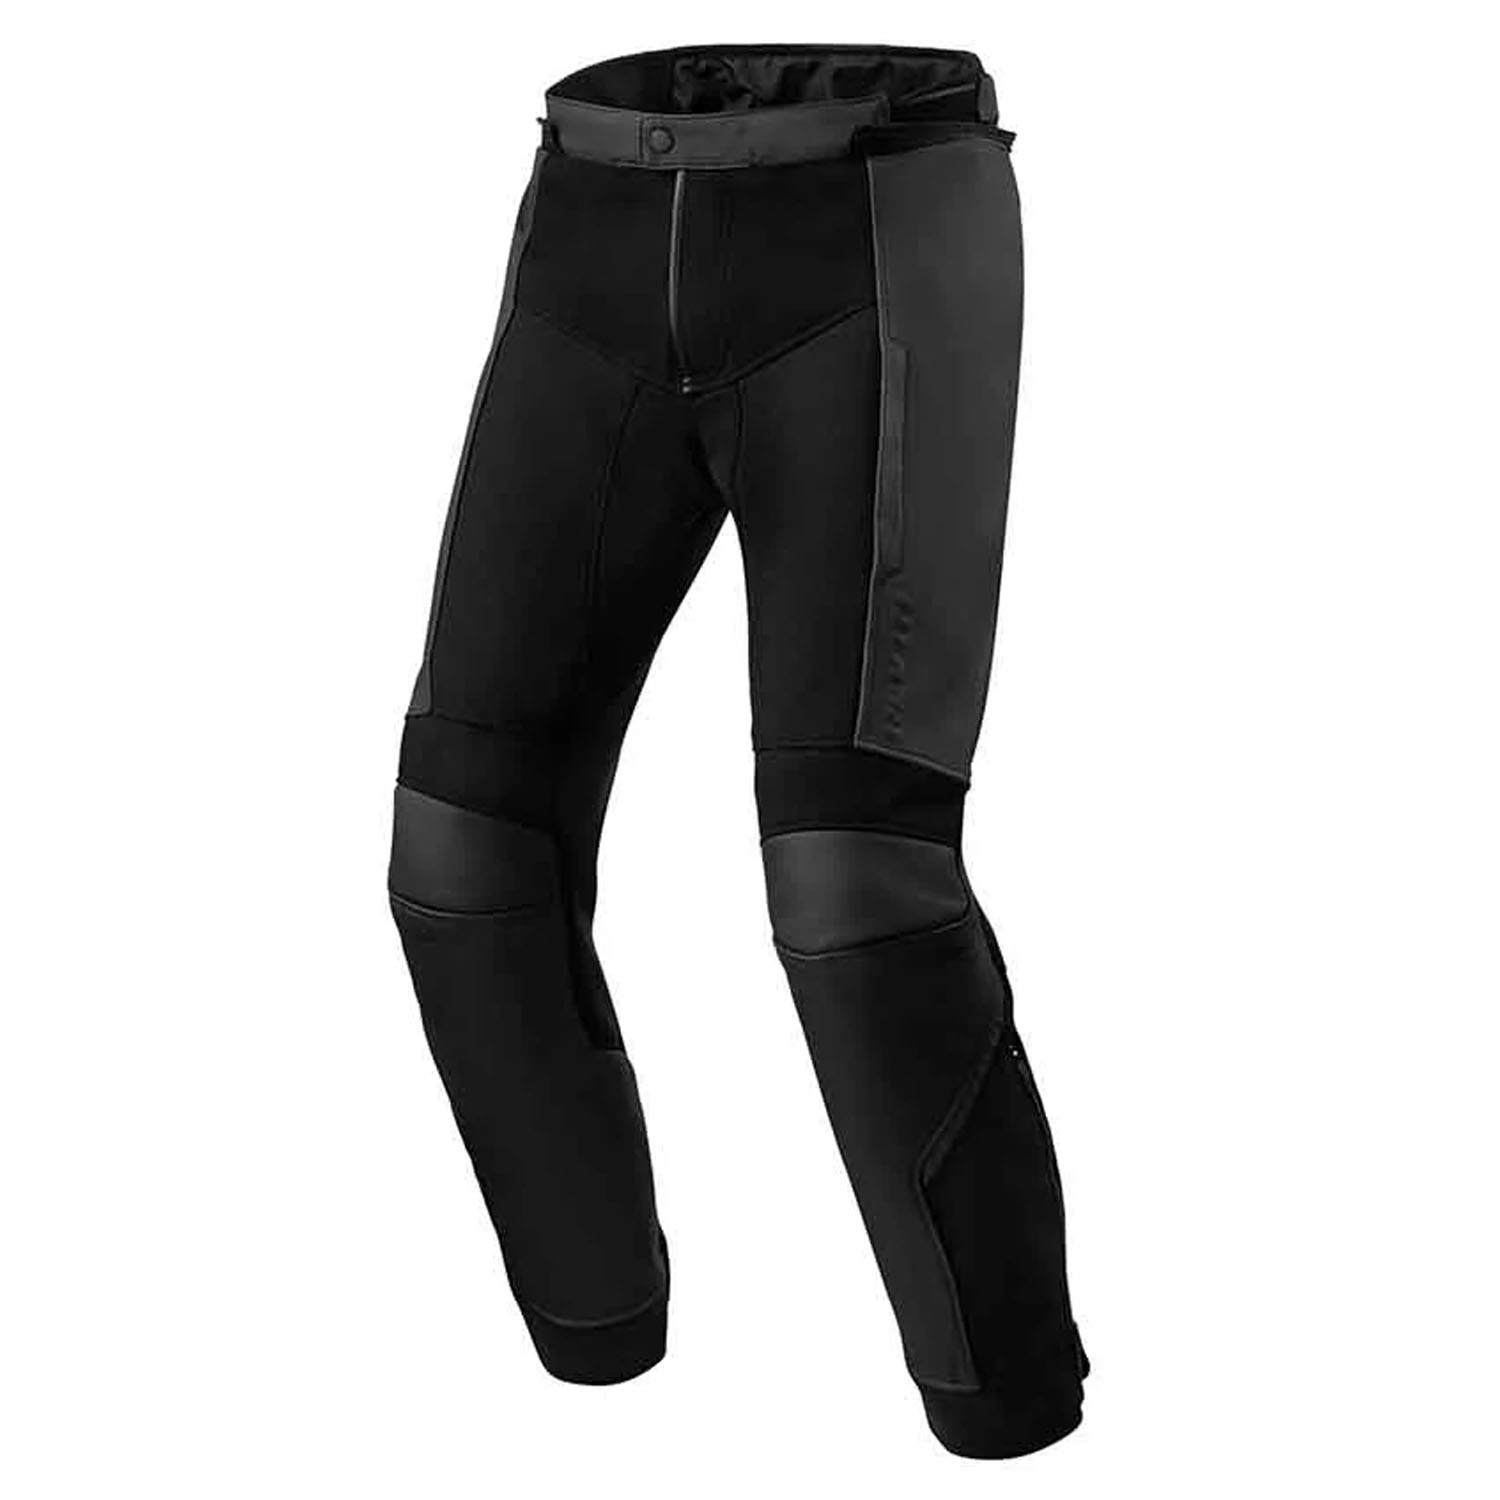 Image of REV'IT! Ignition 4 H2O Black Short Motorcycle Pants Size 52 ID 8700001359344